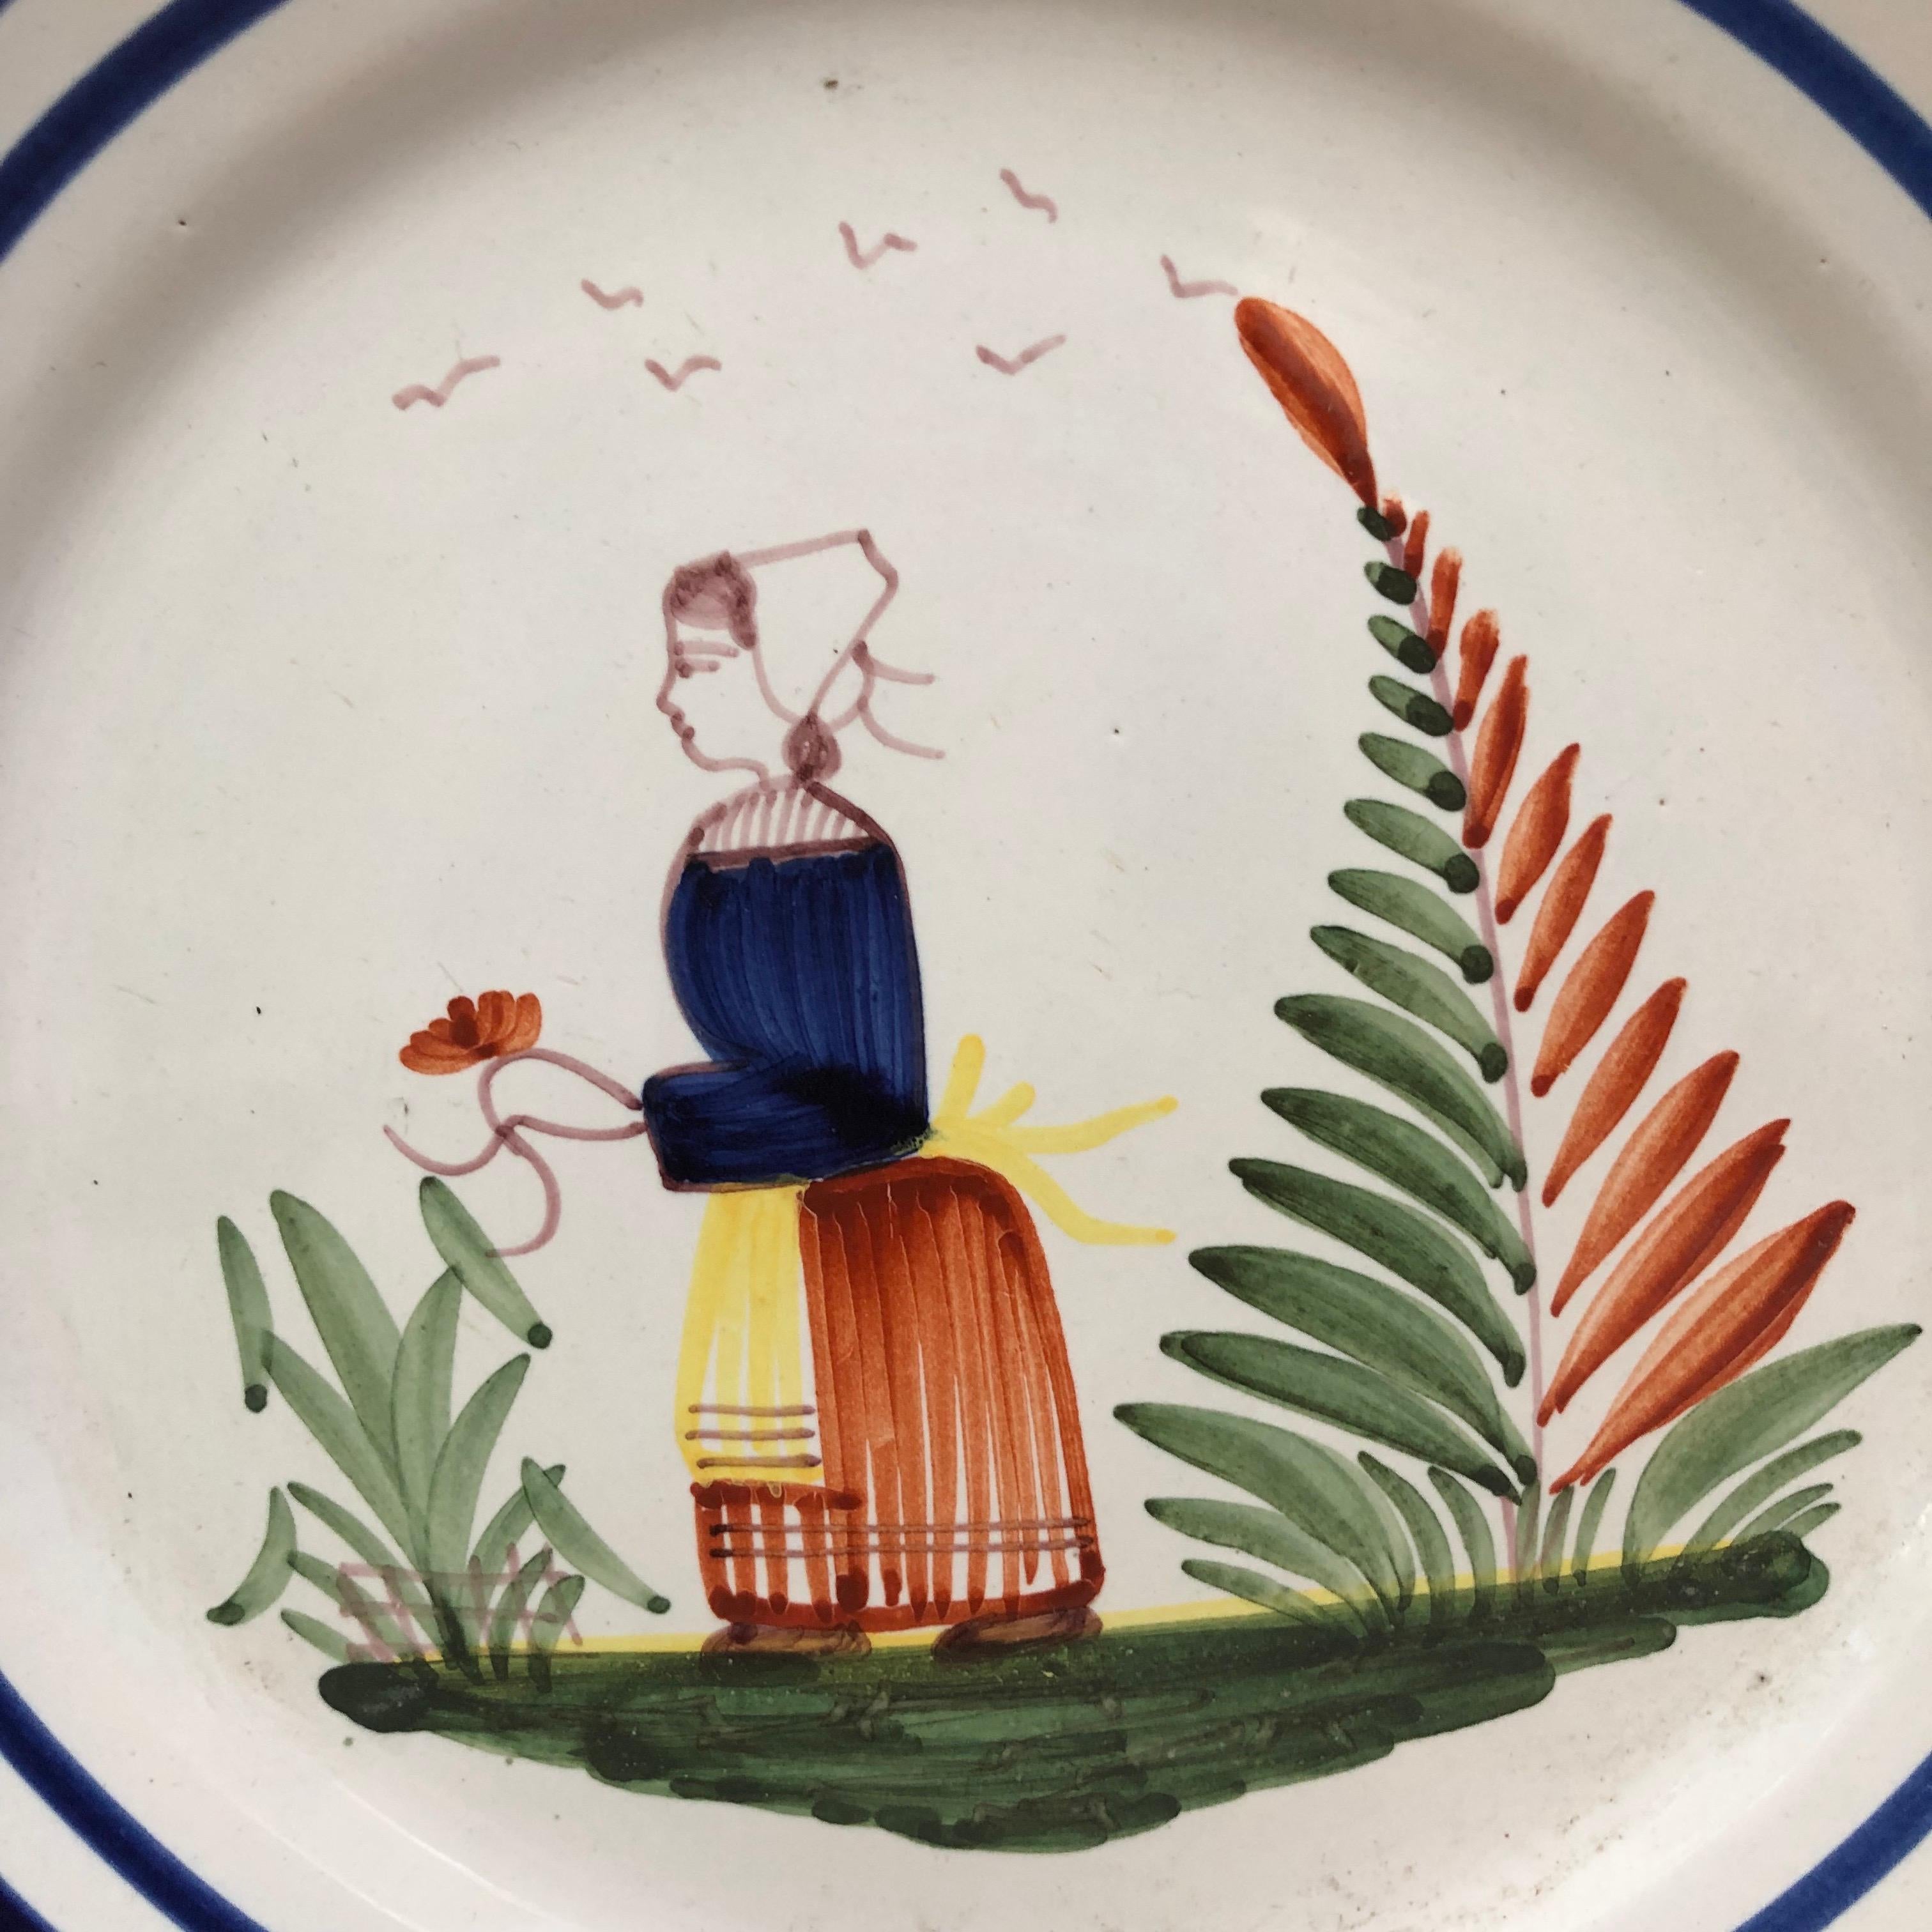 A French large faience plate with a farmer in the costume with flowers signed Henriot Quimper, circa 1950.
Colorful yellow border and blue lines.
Measure: 9.5 diameter.